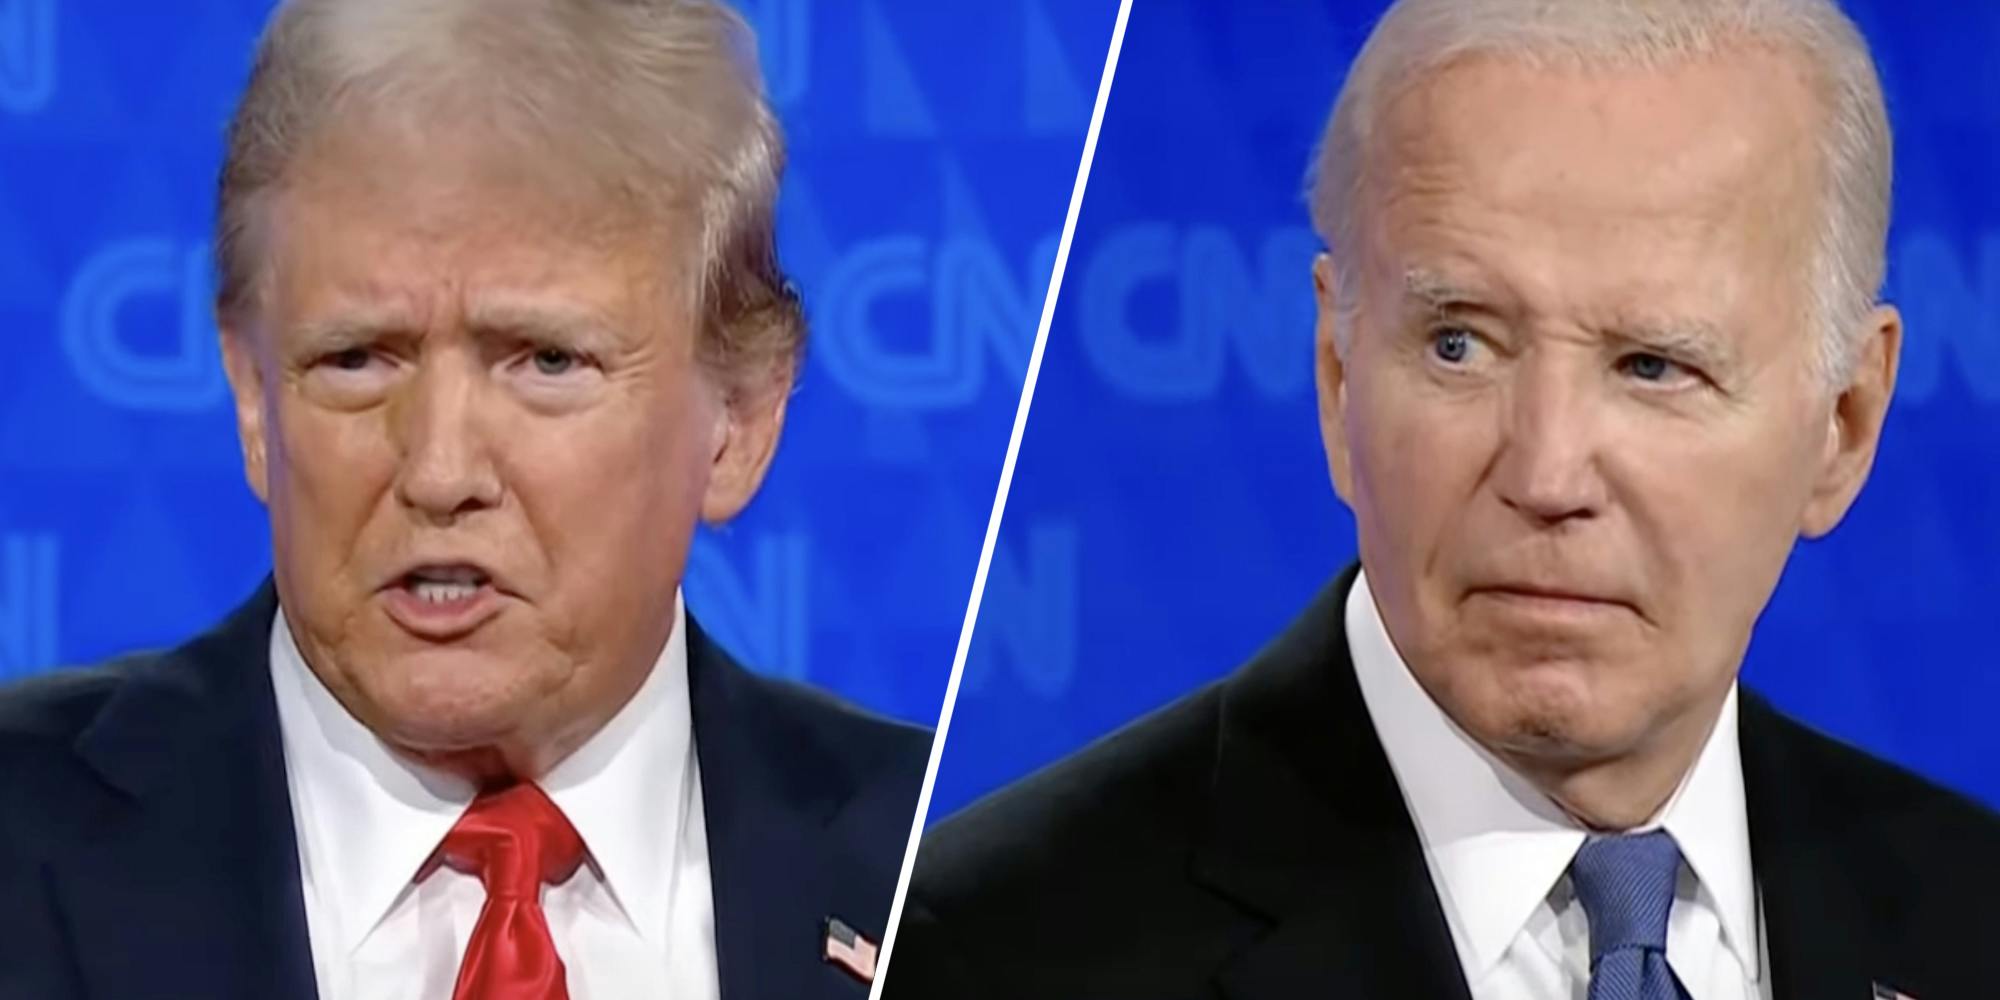 Biden zings Trump over affairs, allegations: ‘You have morals of an alley cat’